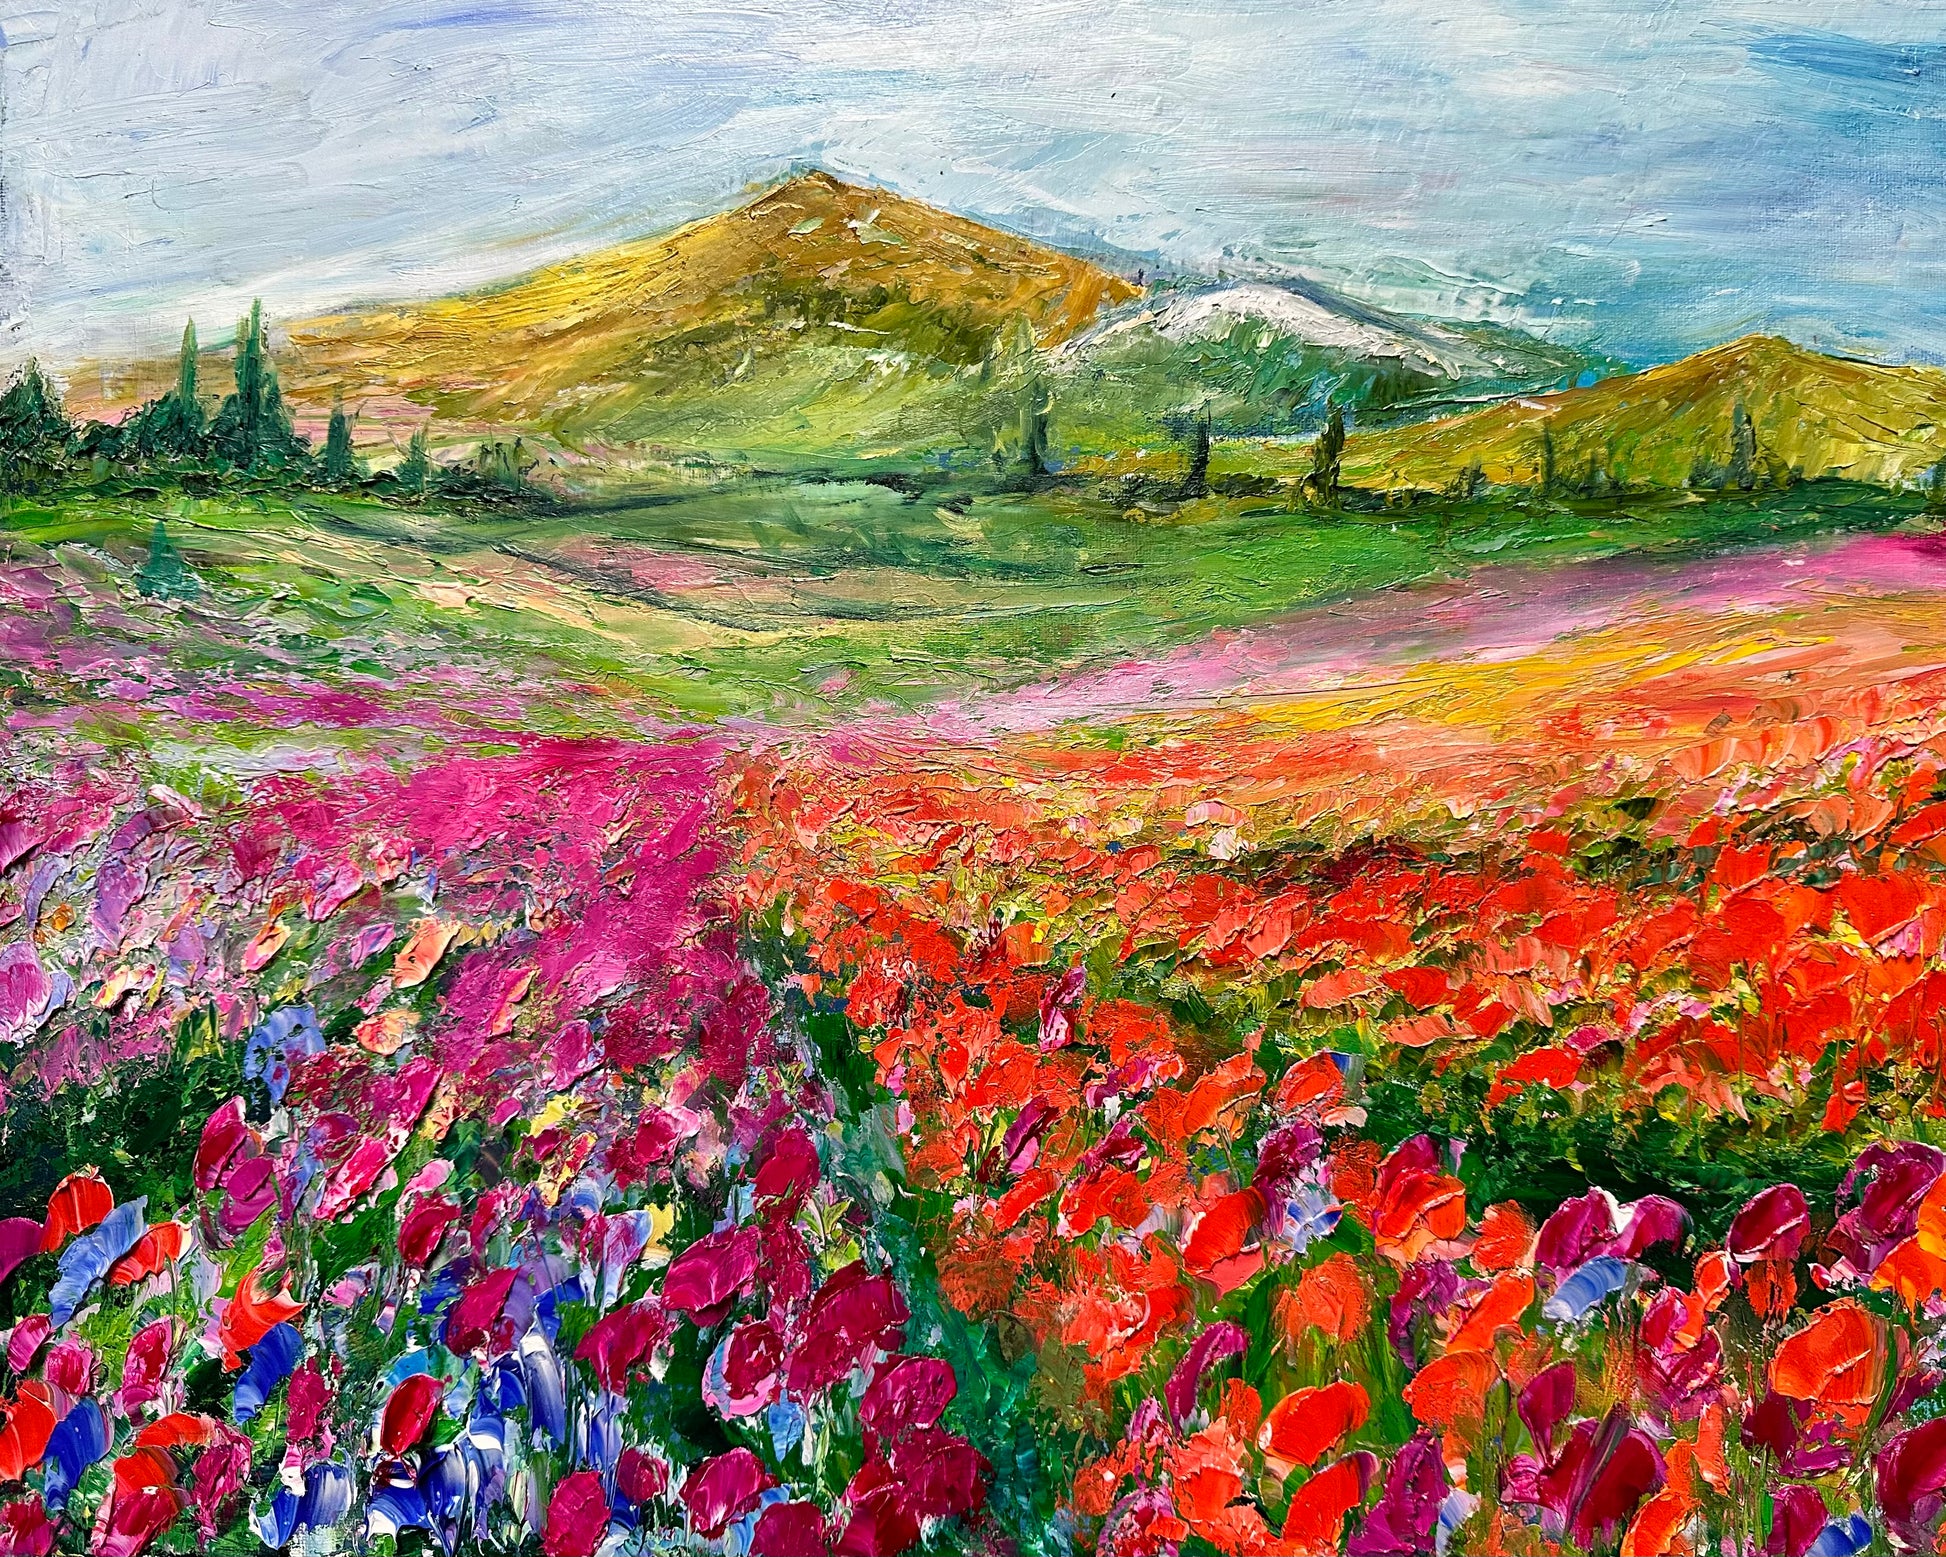 abstract impressionist oil painting of rows of orange and purple flowers with mountain in the background, measuring 16" x 20"